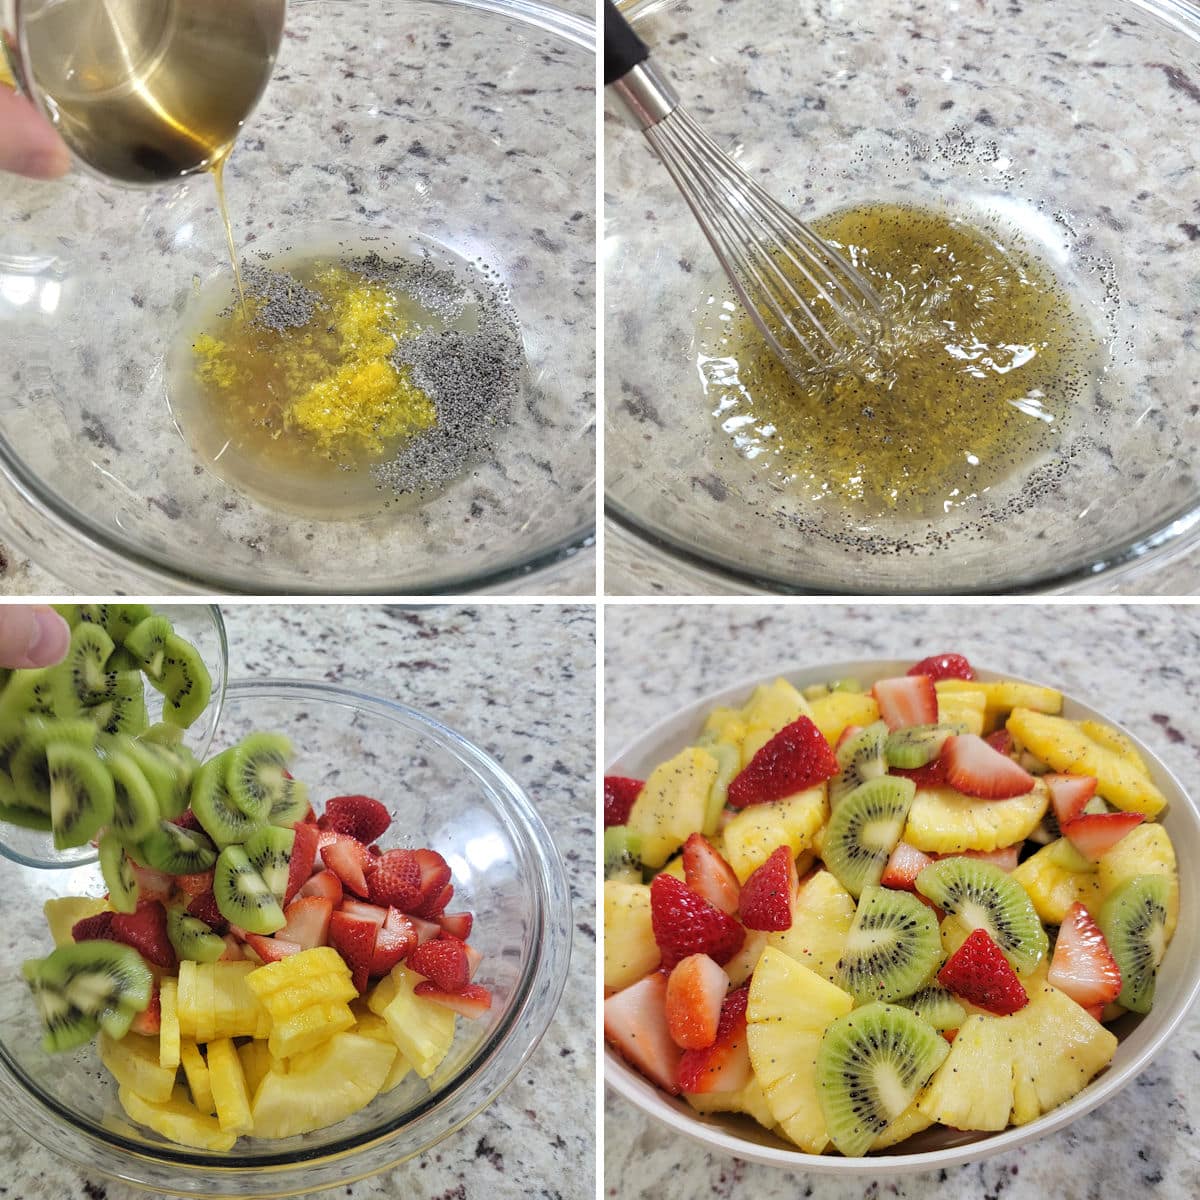 Making spring fruit salad in a large glass bowl.